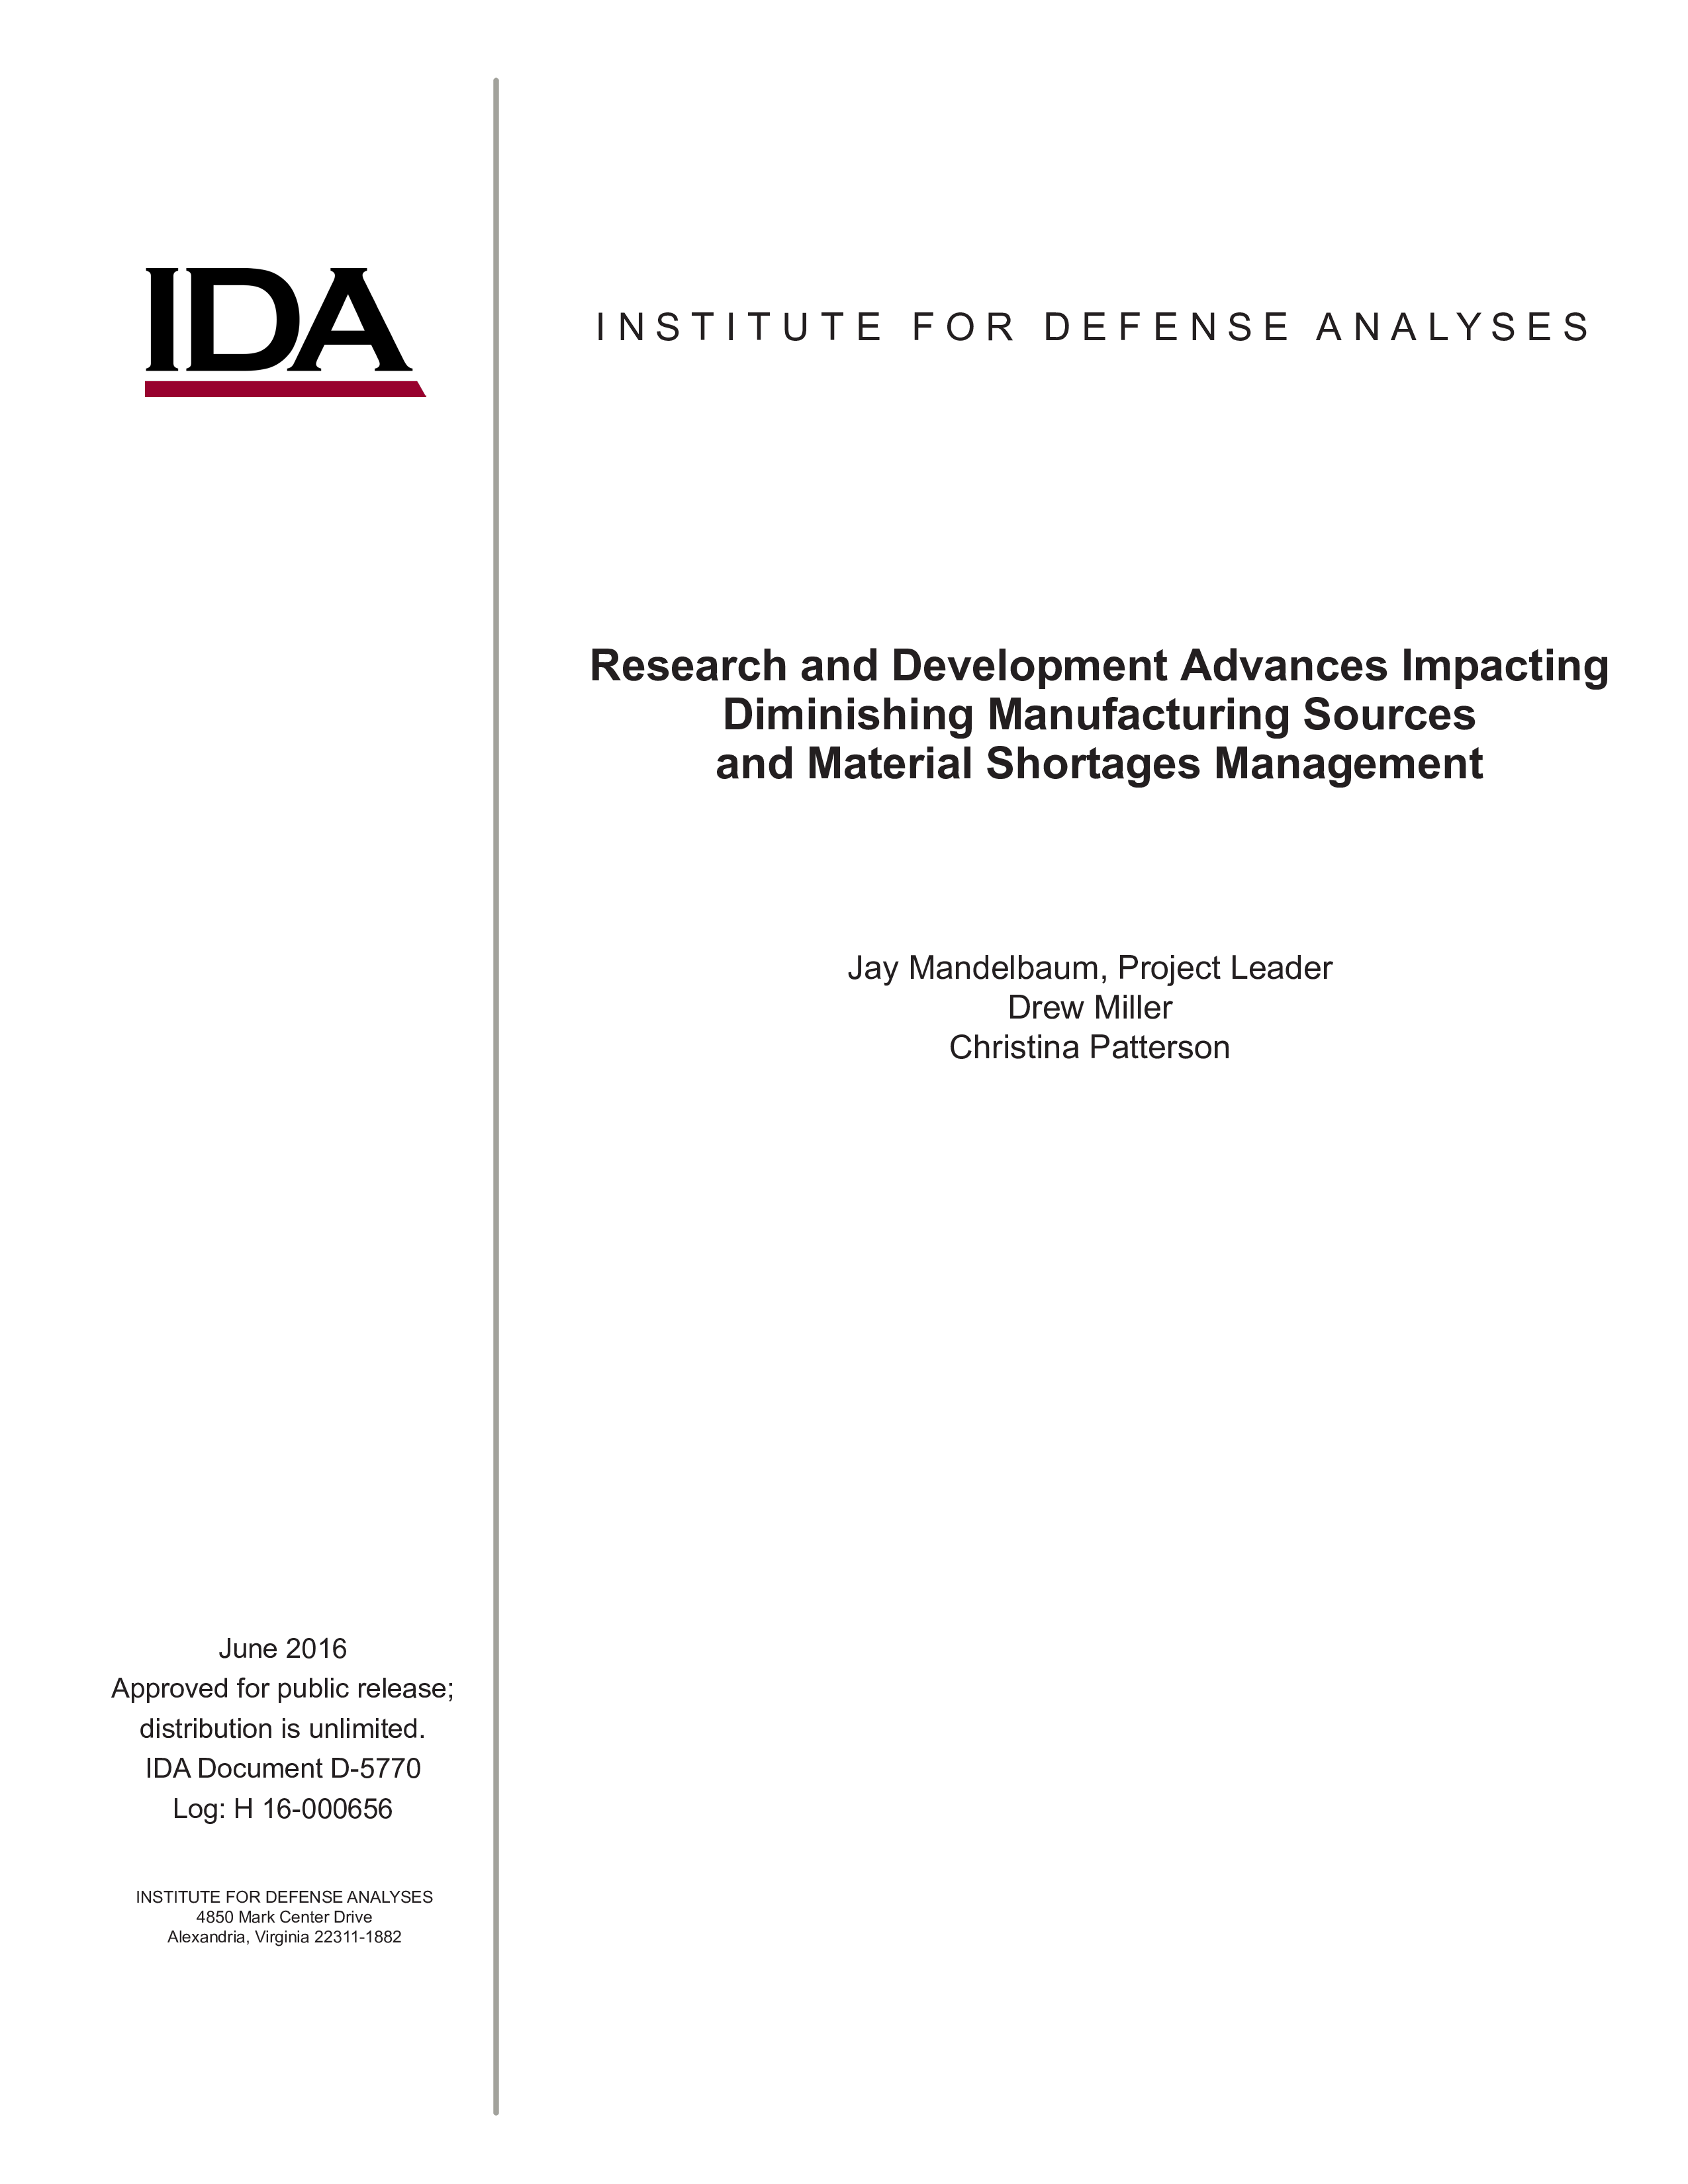 Research and Development Advances Impacting Diminishing Manufacturing Sources and Material Shortages Management